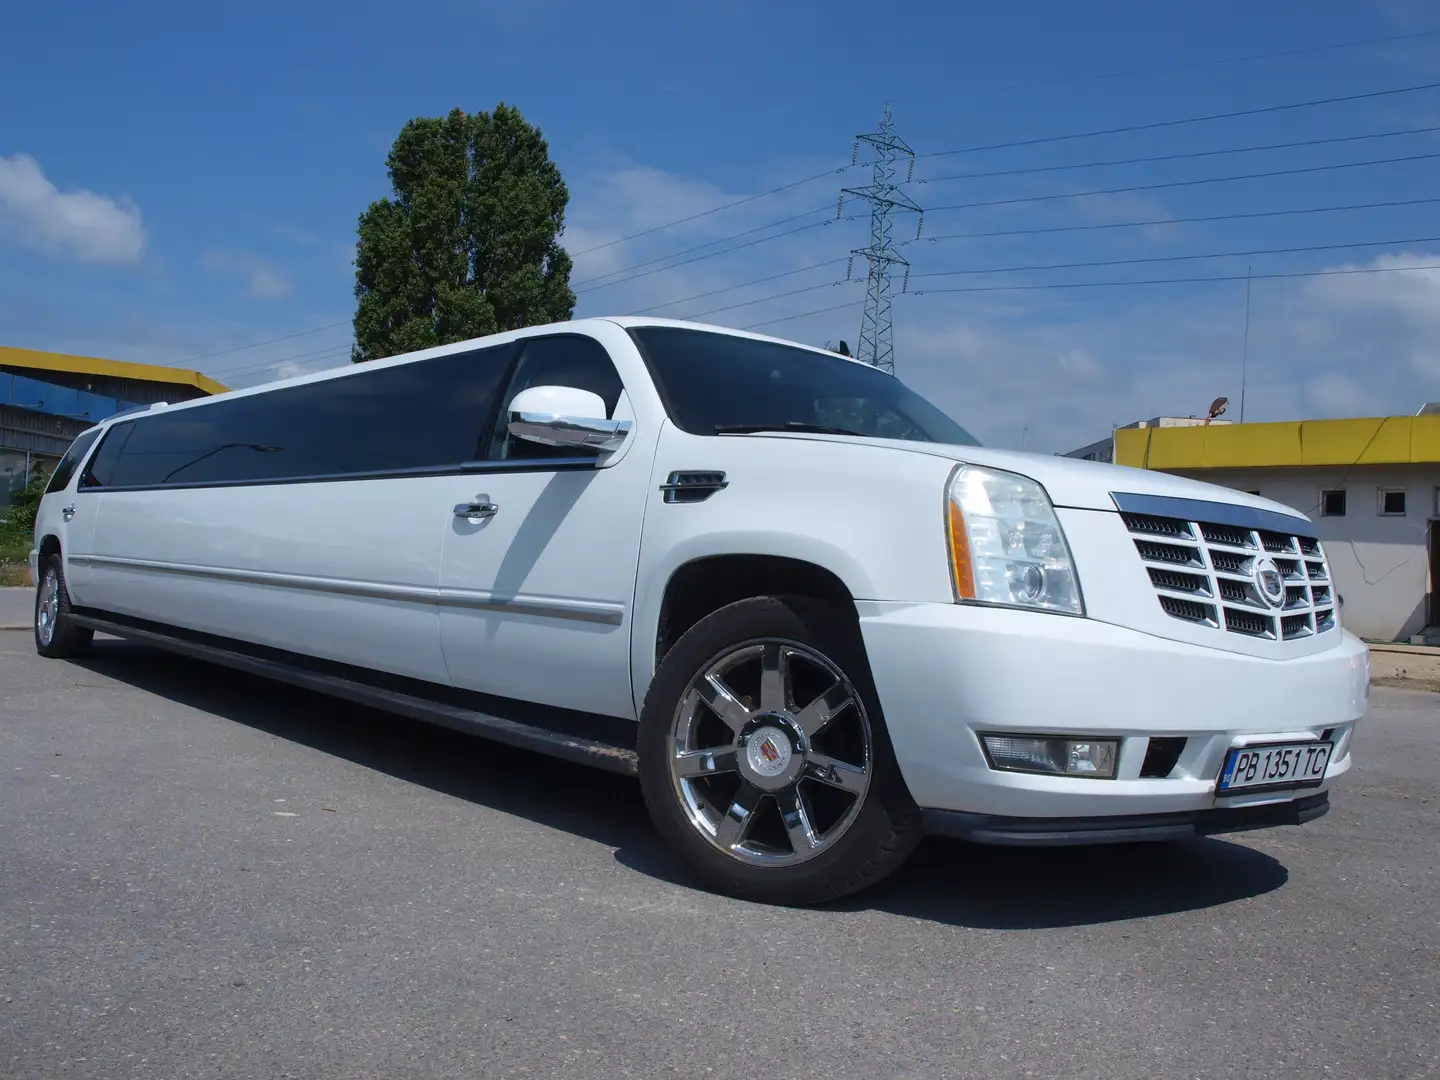 Cadillac Escalade 203-inch Stretch Limousine by Moonlight Industries Білий - 1